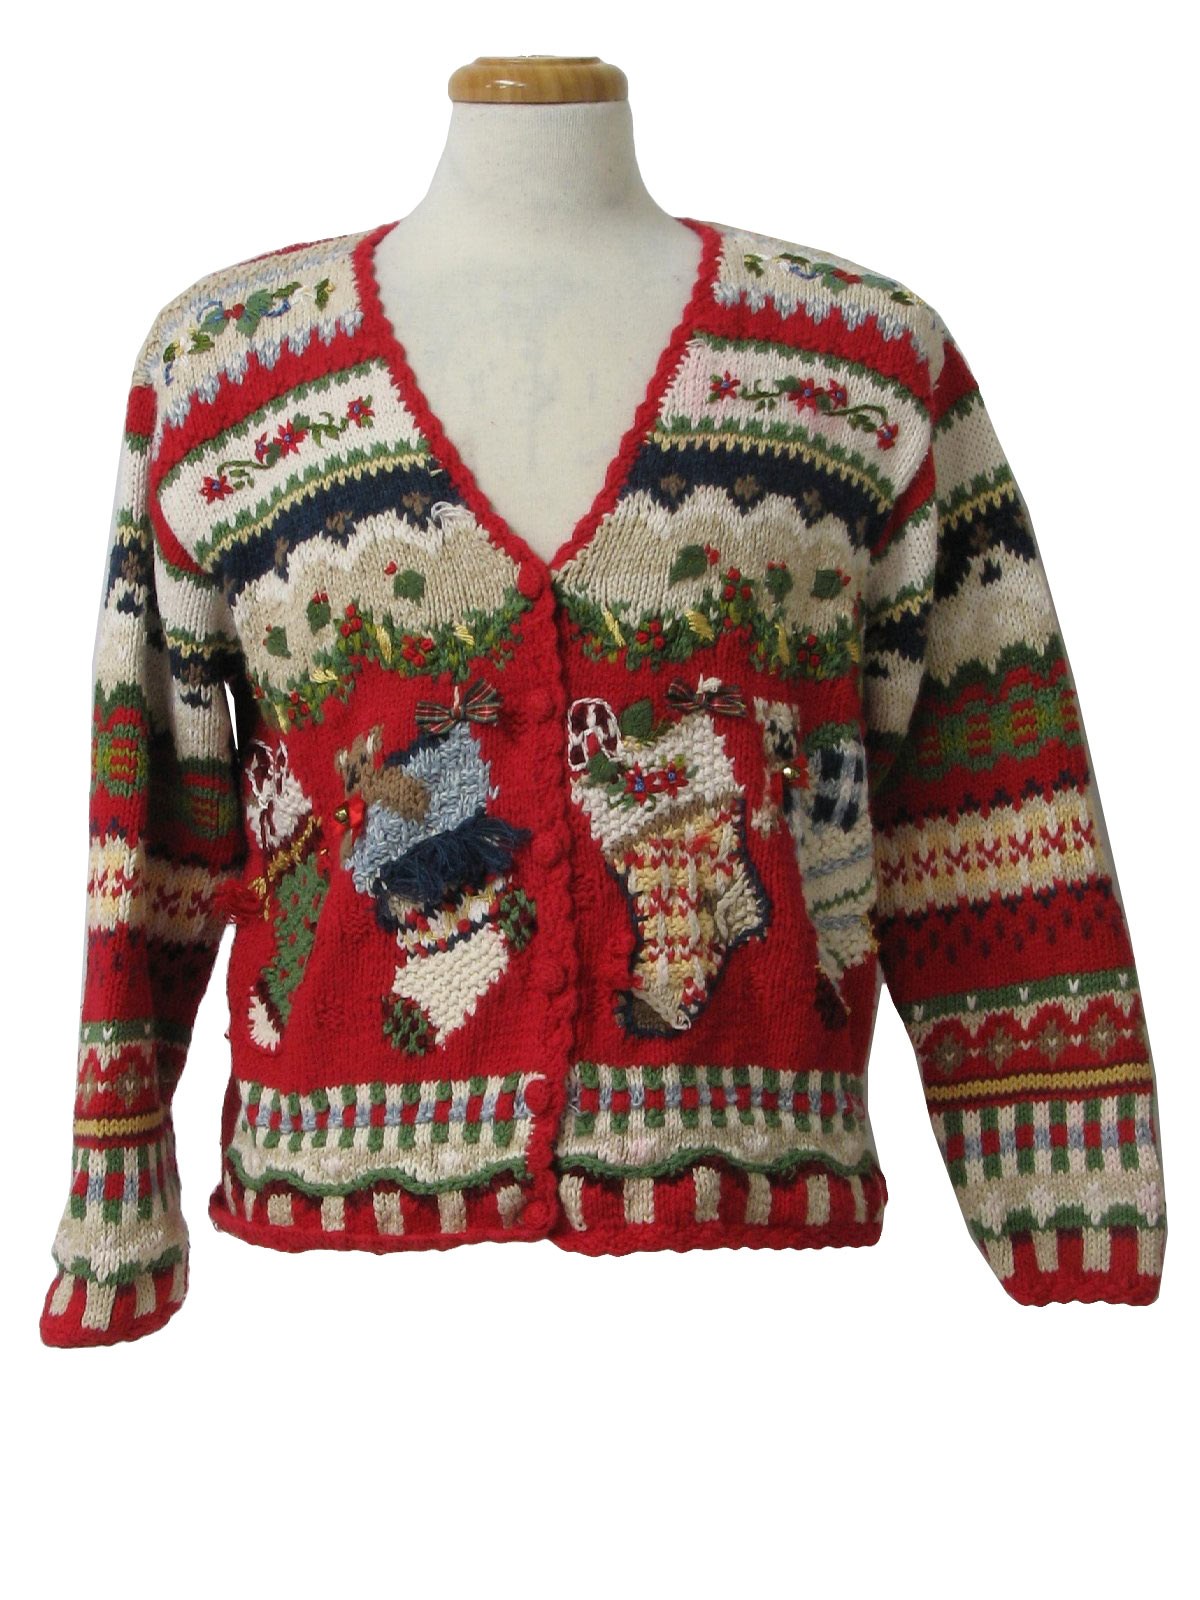 Womens Ugly Christmas Cardigan Sweater: -Croft and Barrow- Womens red ...